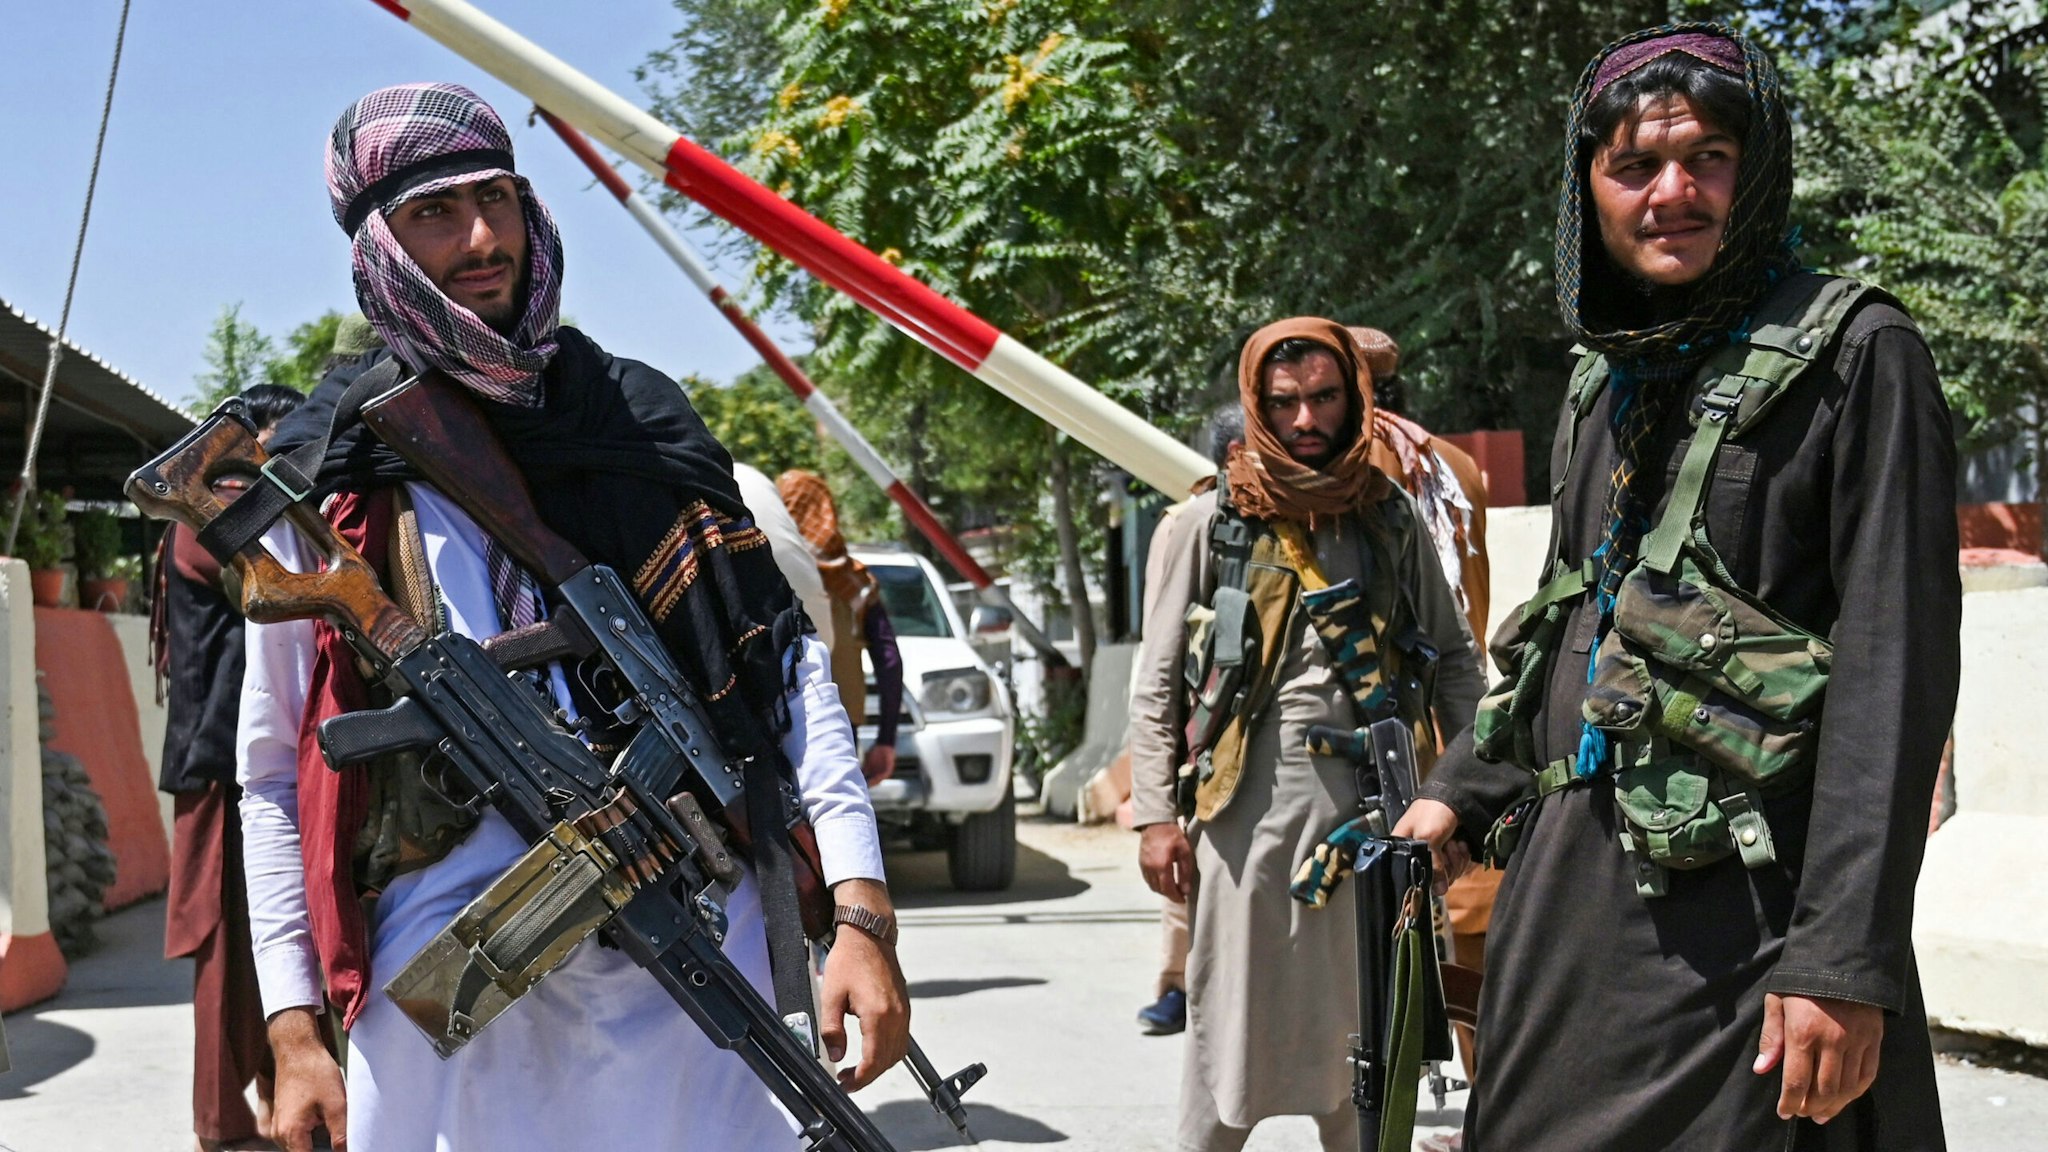 TOPSHOT - Taliban fighters stand guard along a roadside near the Zanbaq Square in Kabul on August 16, 2021, after a stunningly swift end to Afghanistan's 20-year war, as thousands of people mobbed the city's airport trying to flee the group's feared hardline brand of Islamist rule.